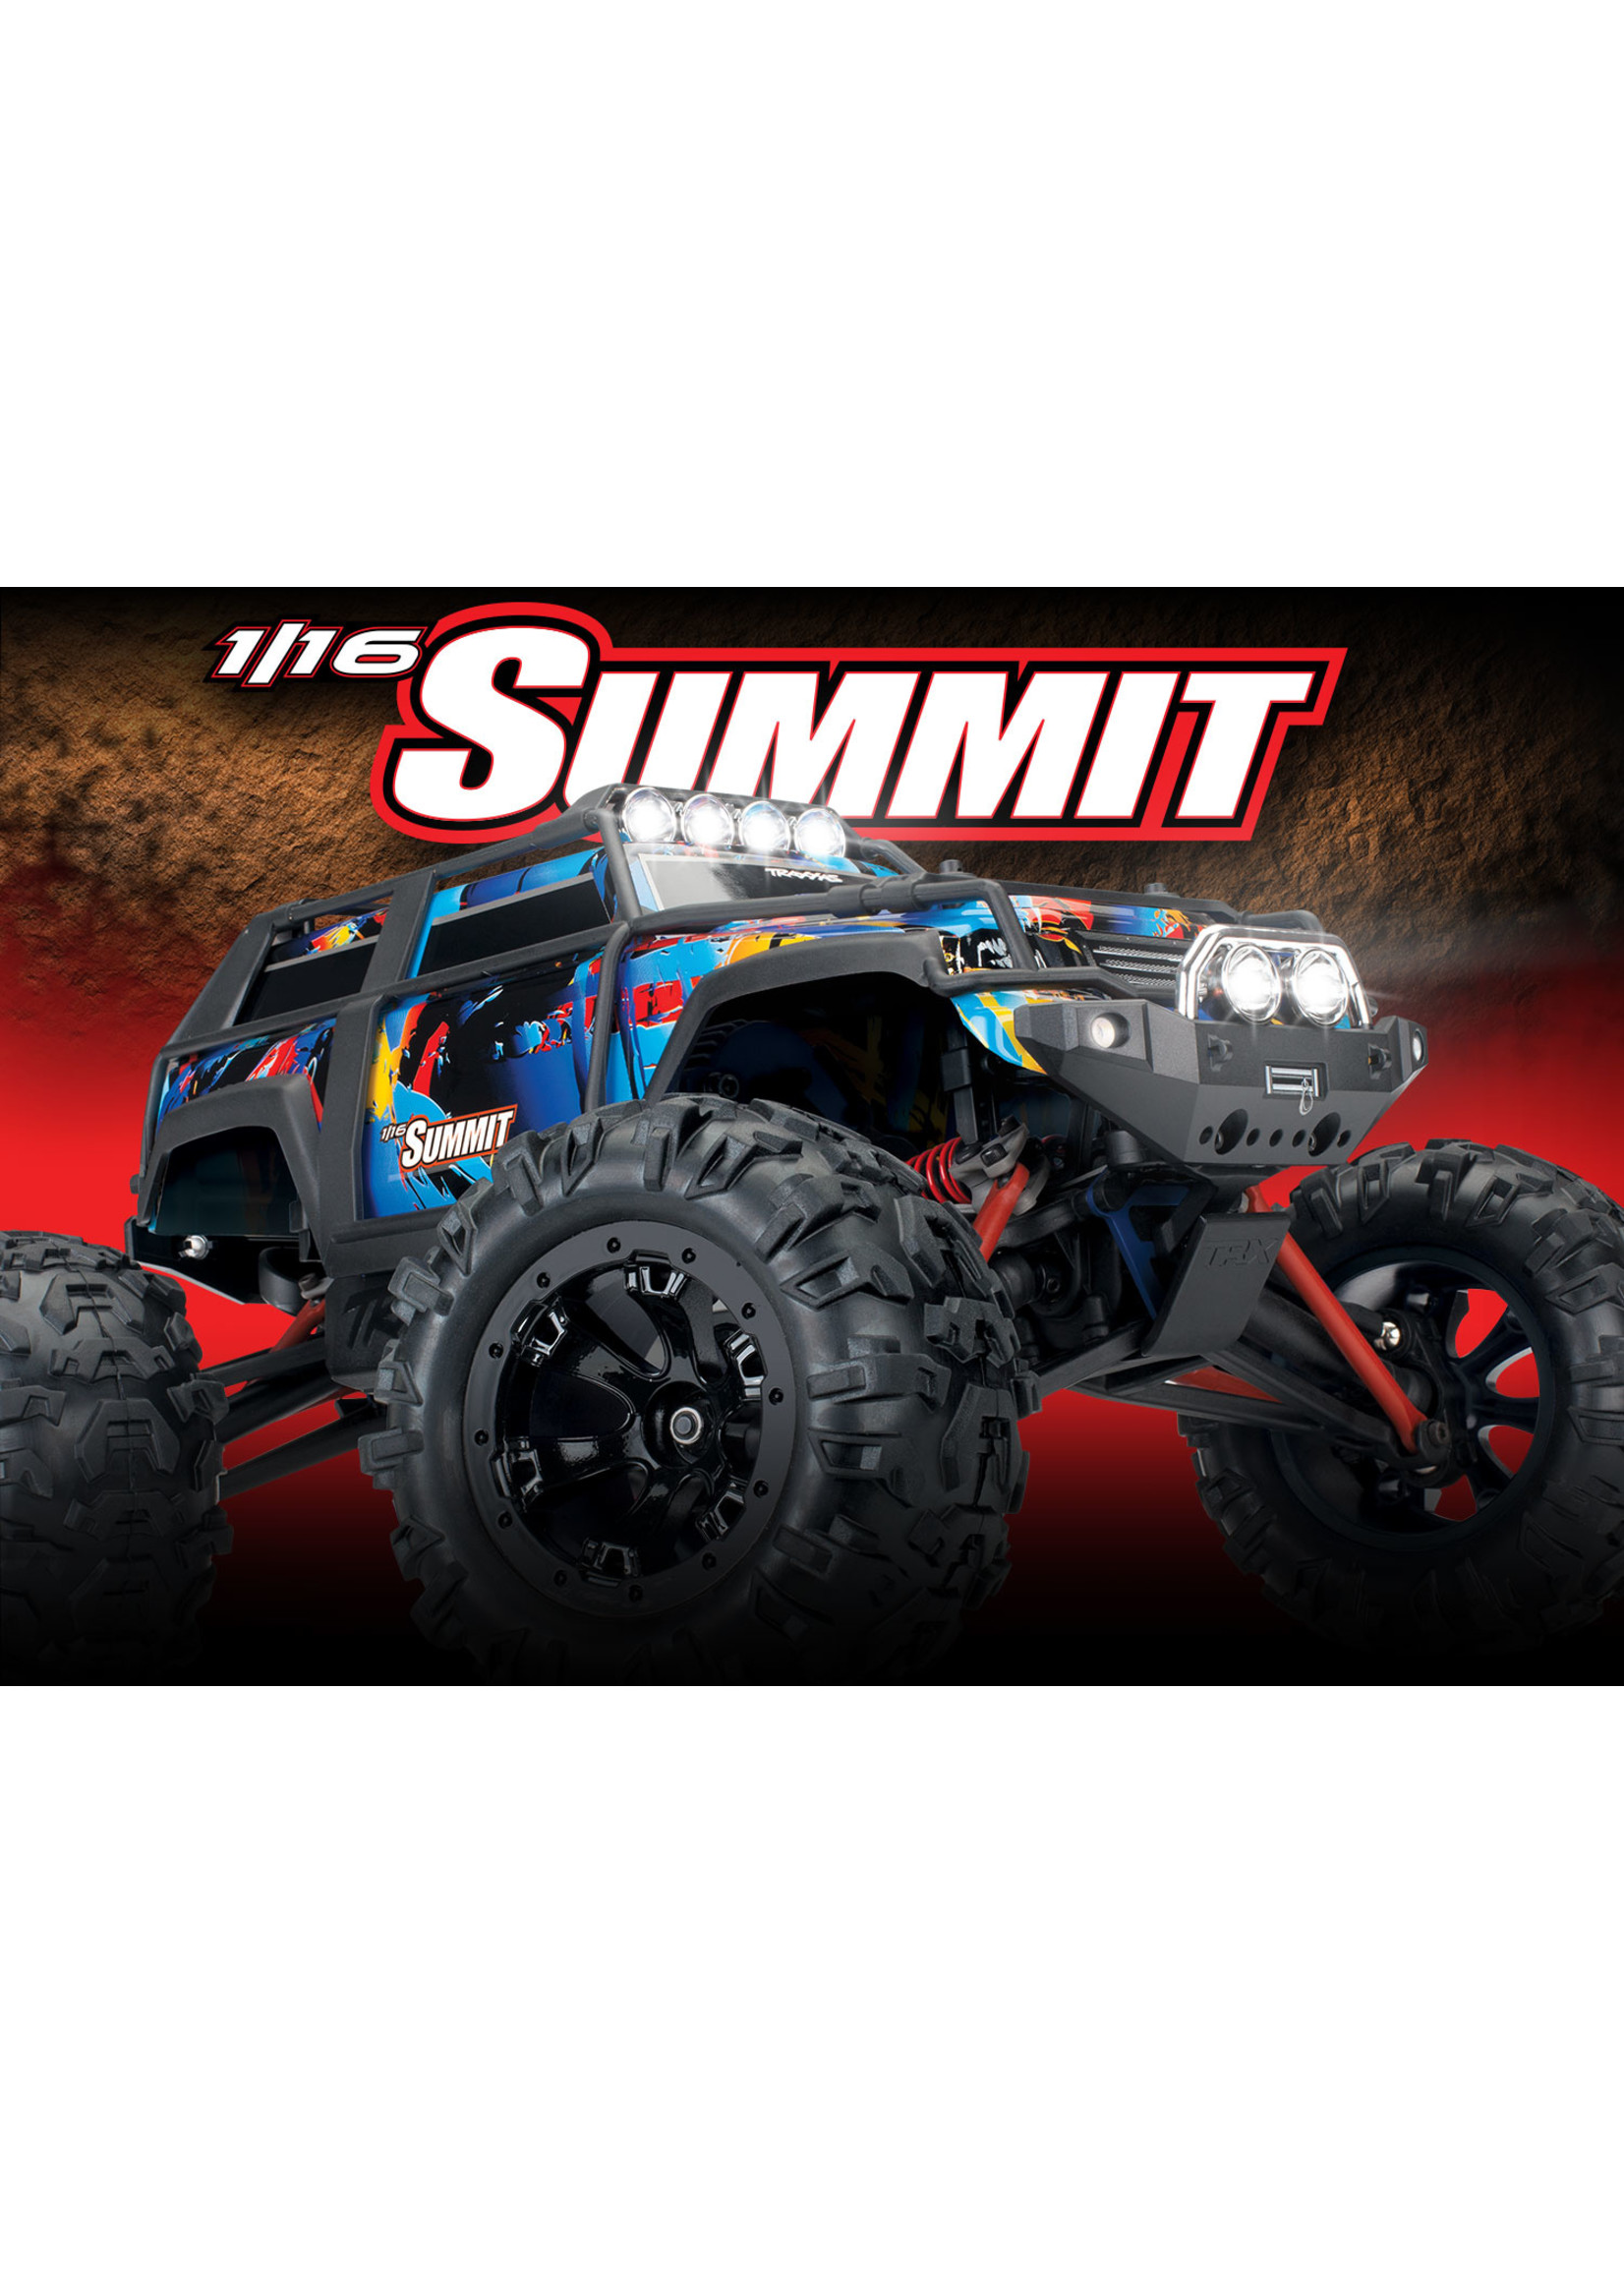 Traxxas 1/16 Summit 4WD RTR Extreme Terrain Monster Truck